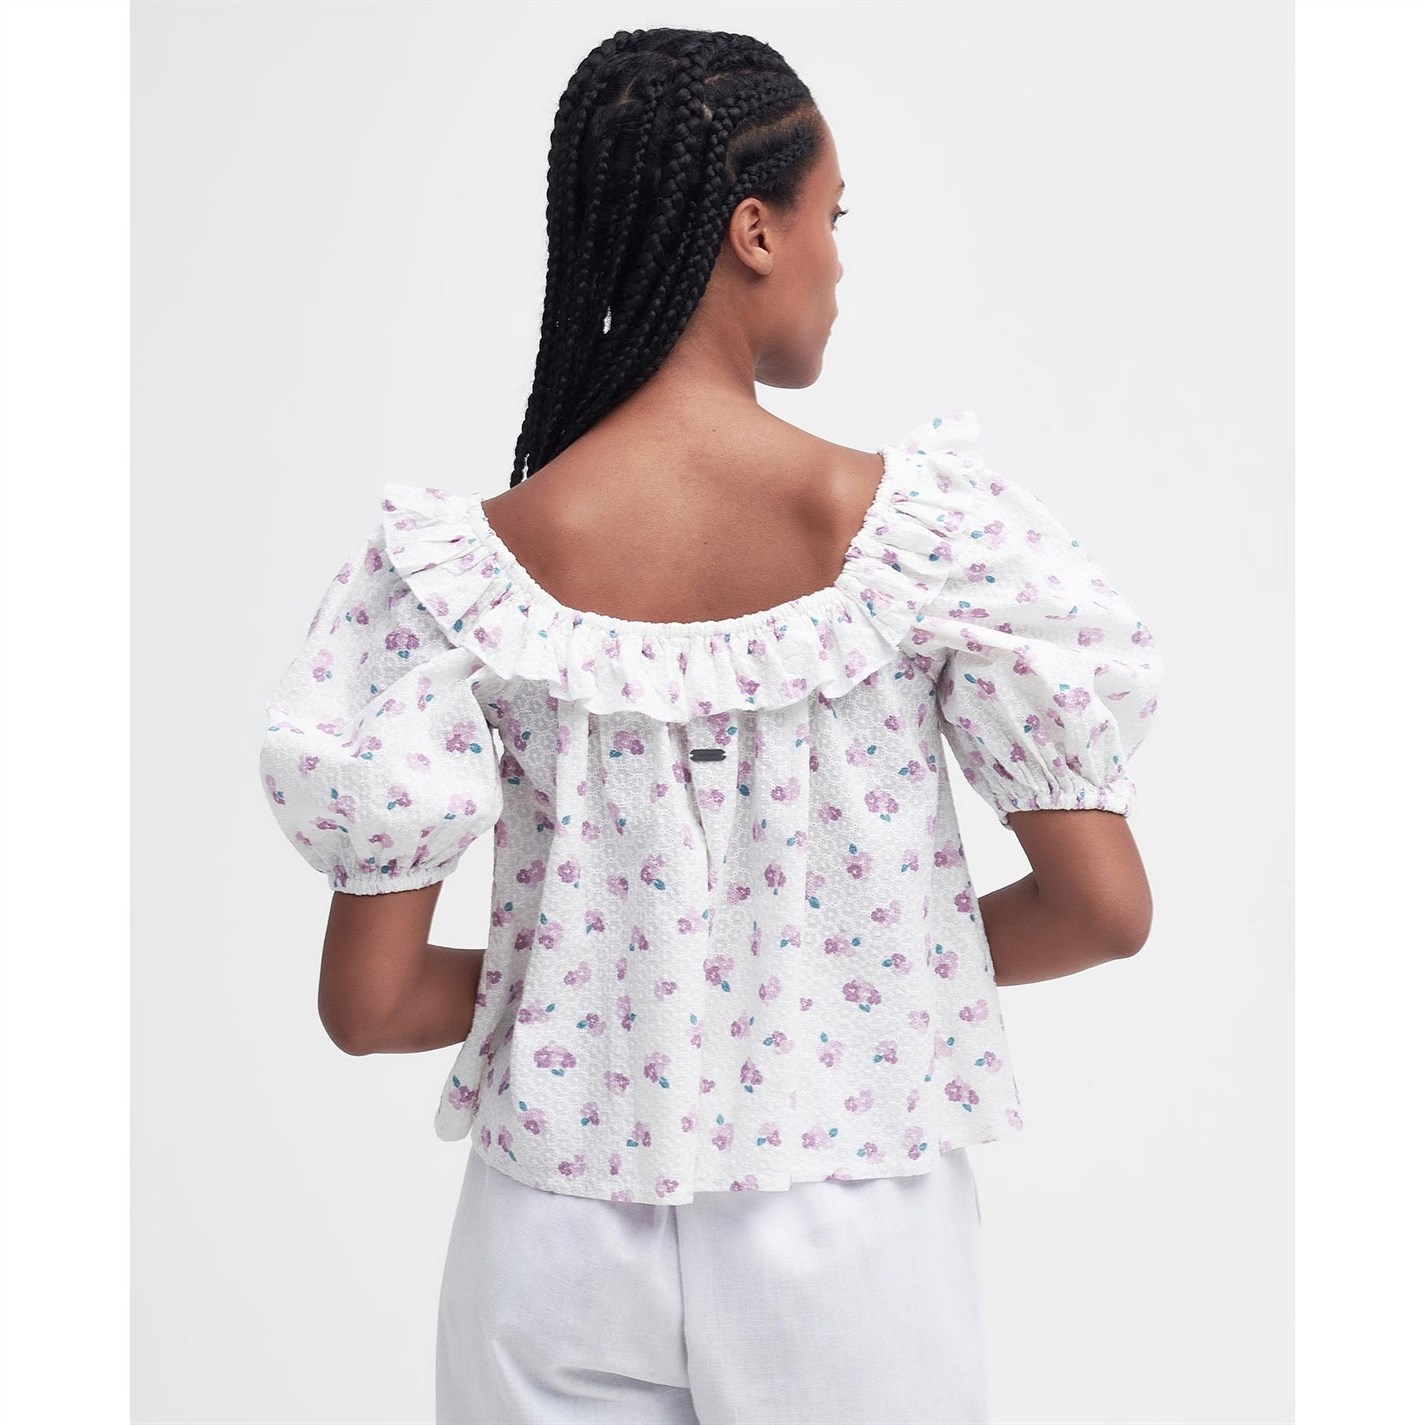 GOODLEIGH OFF-THE-SHOULDER TOP - 3